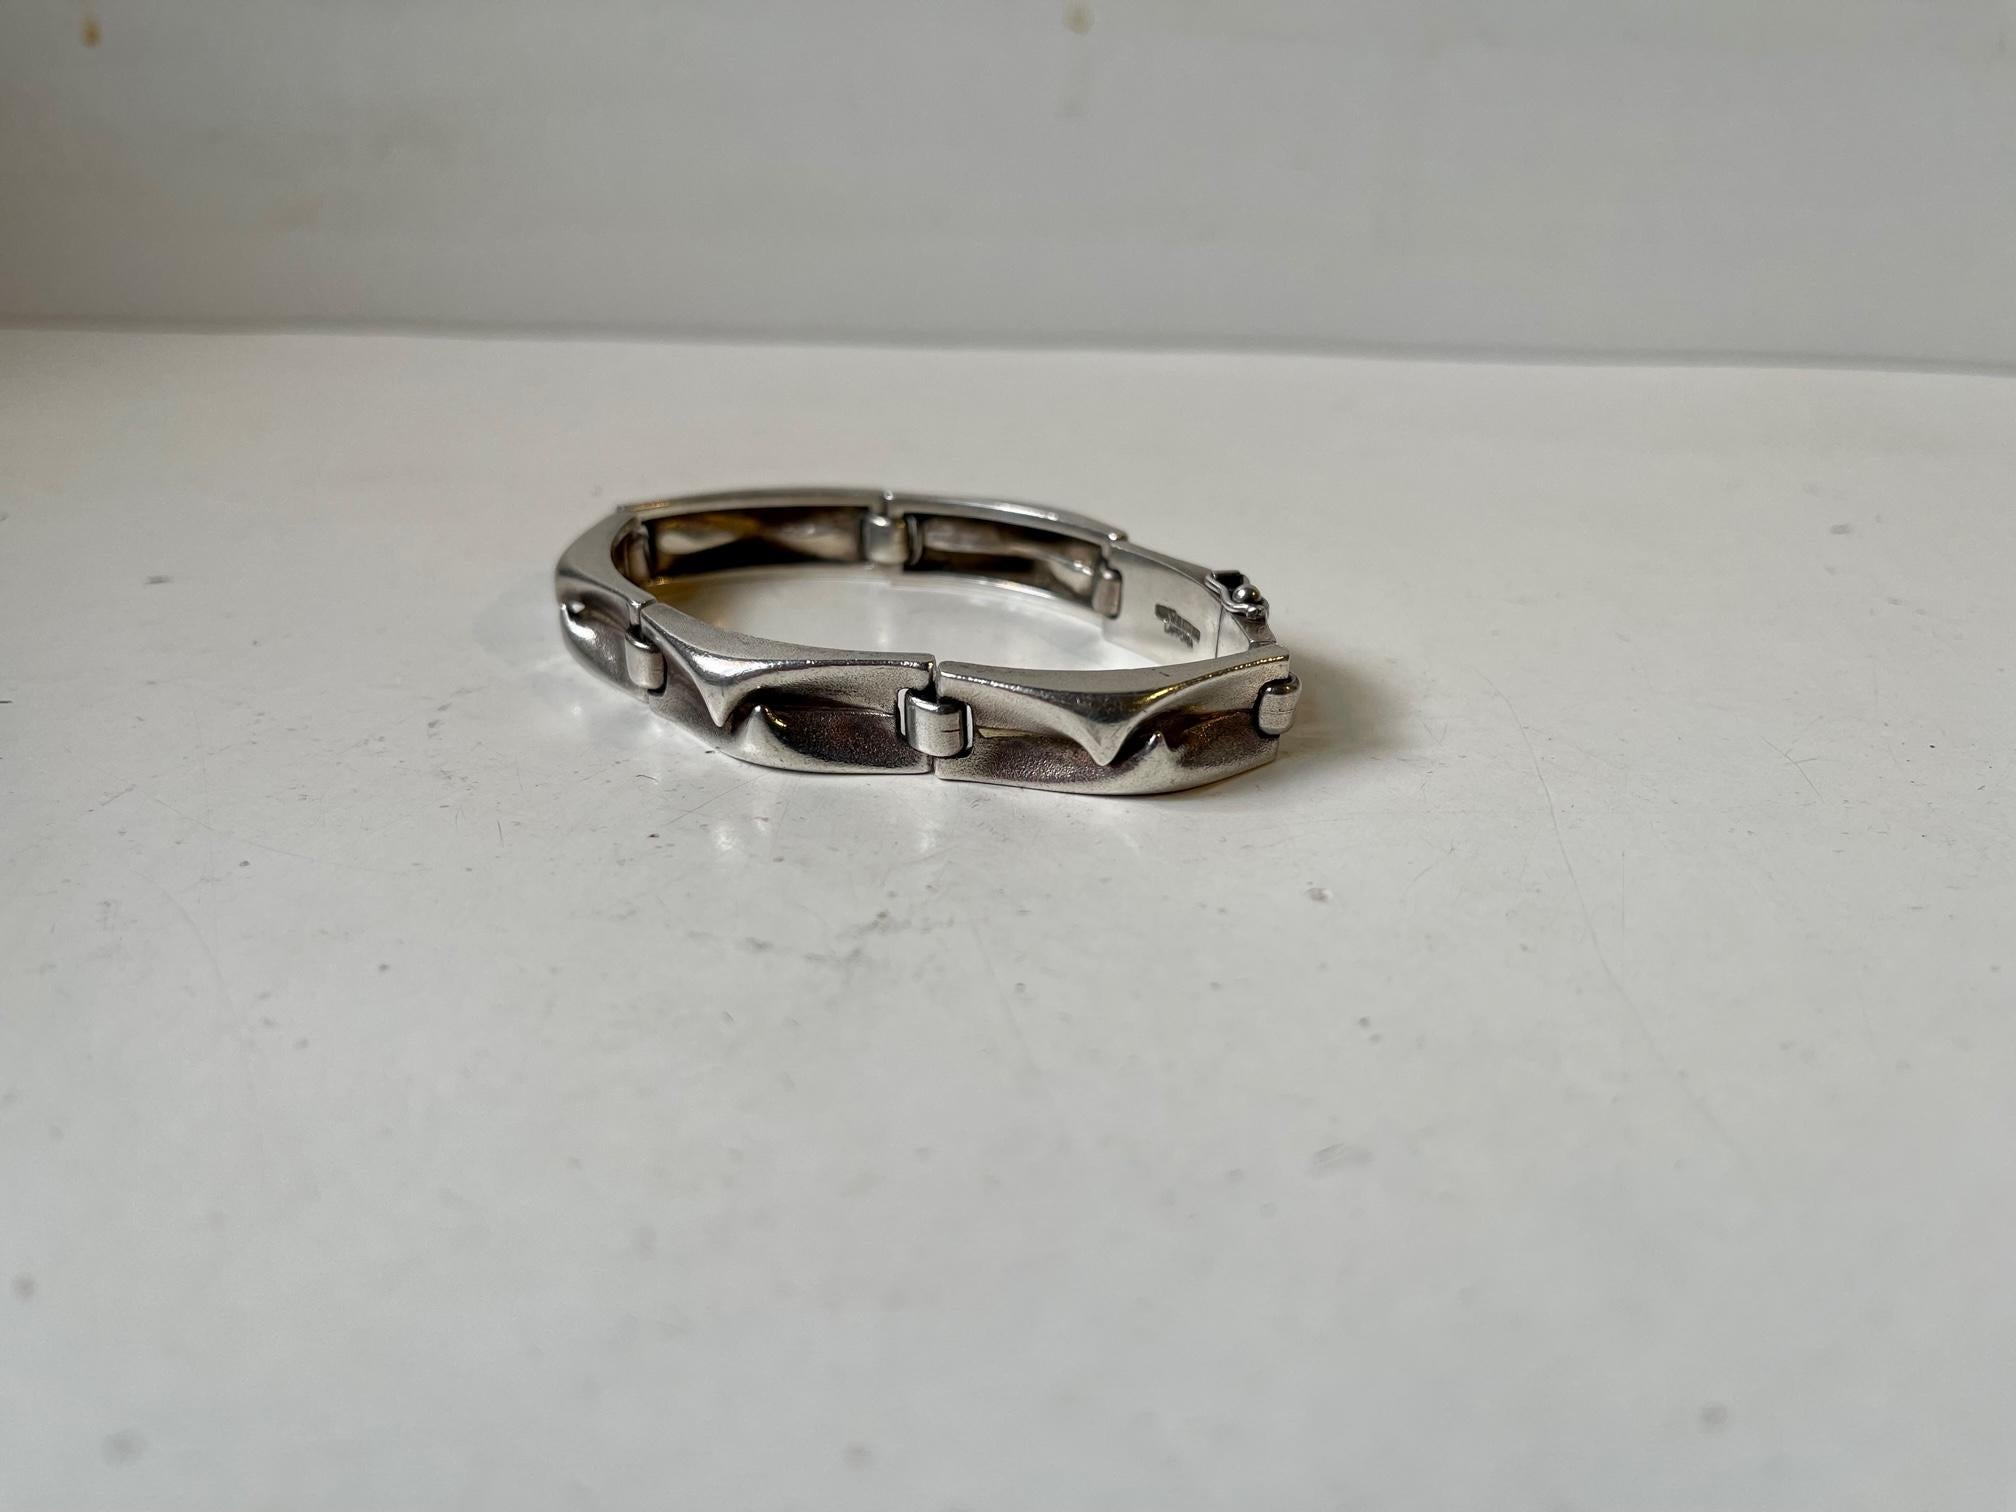 Much sought after vintage 'organic' modern sterling silver bracelet. Fully hallmarked by Lapponia, Finland. Designed during the 1970s by Bjorn Weckstrom.
Measures: Length closed: 7.1in / 18cm. Width: 10mm.